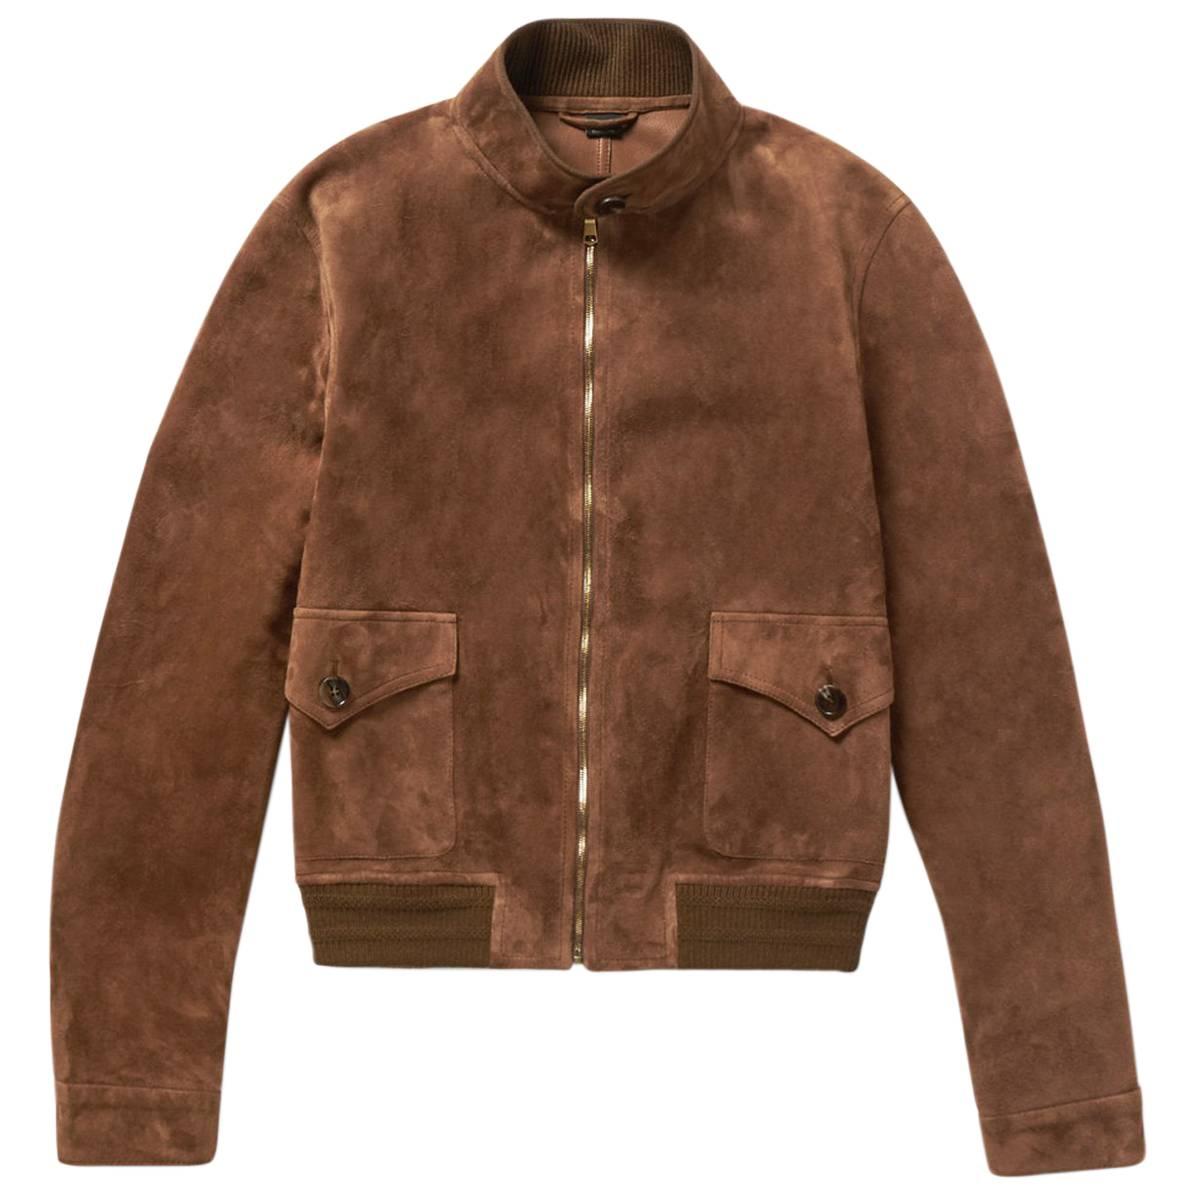 New Gucci Men's Goat Suede Brown Bomber Jacket  48 - US 38 For Sale